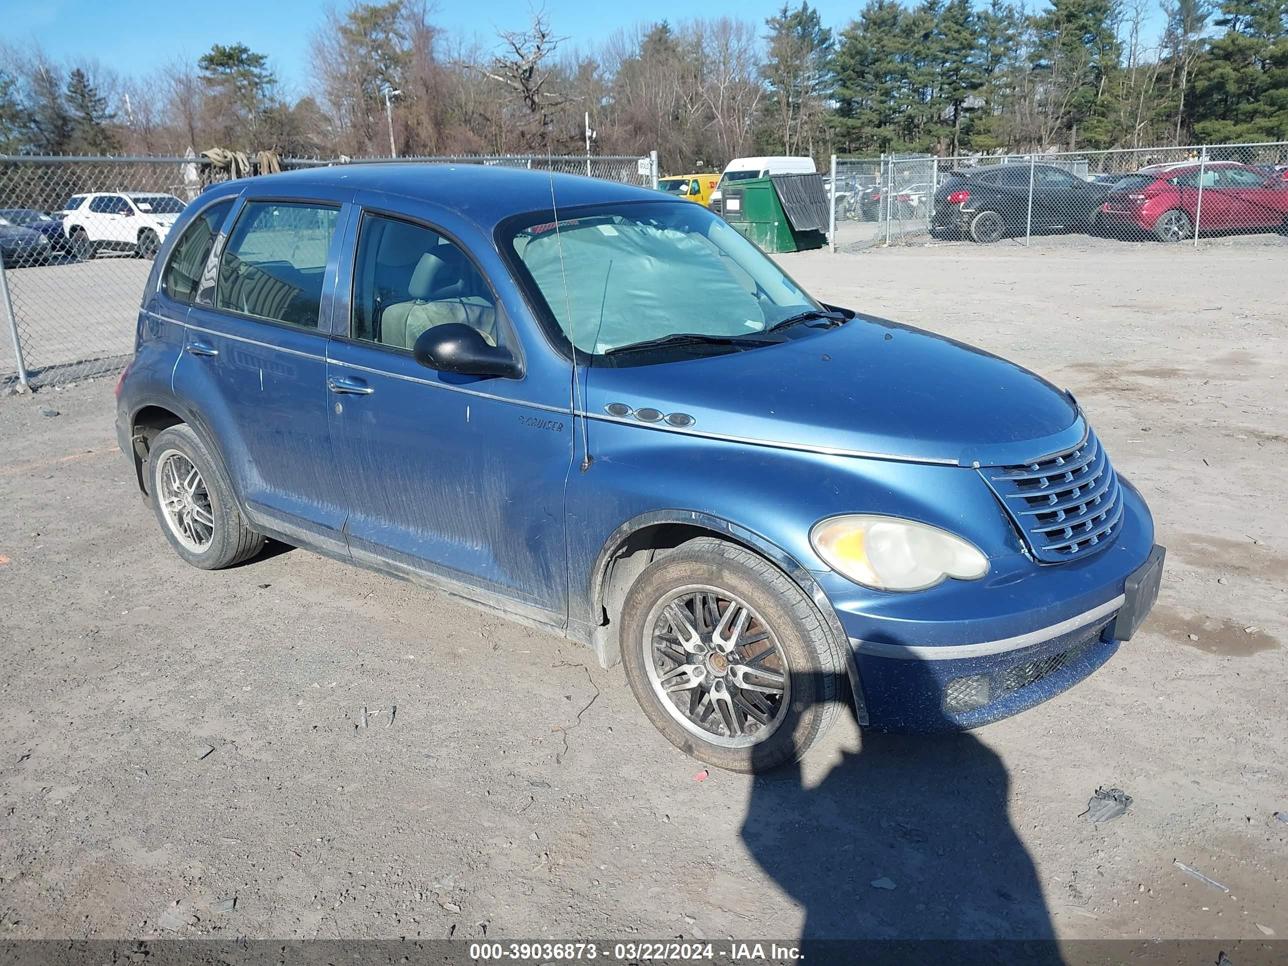 vin: 3A4FY48B46T204371 3A4FY48B46T204371 2006 chrysler pt cruiser 2400 for Sale in 12303, 1210 Kings Road, Schenectady, New York, USA